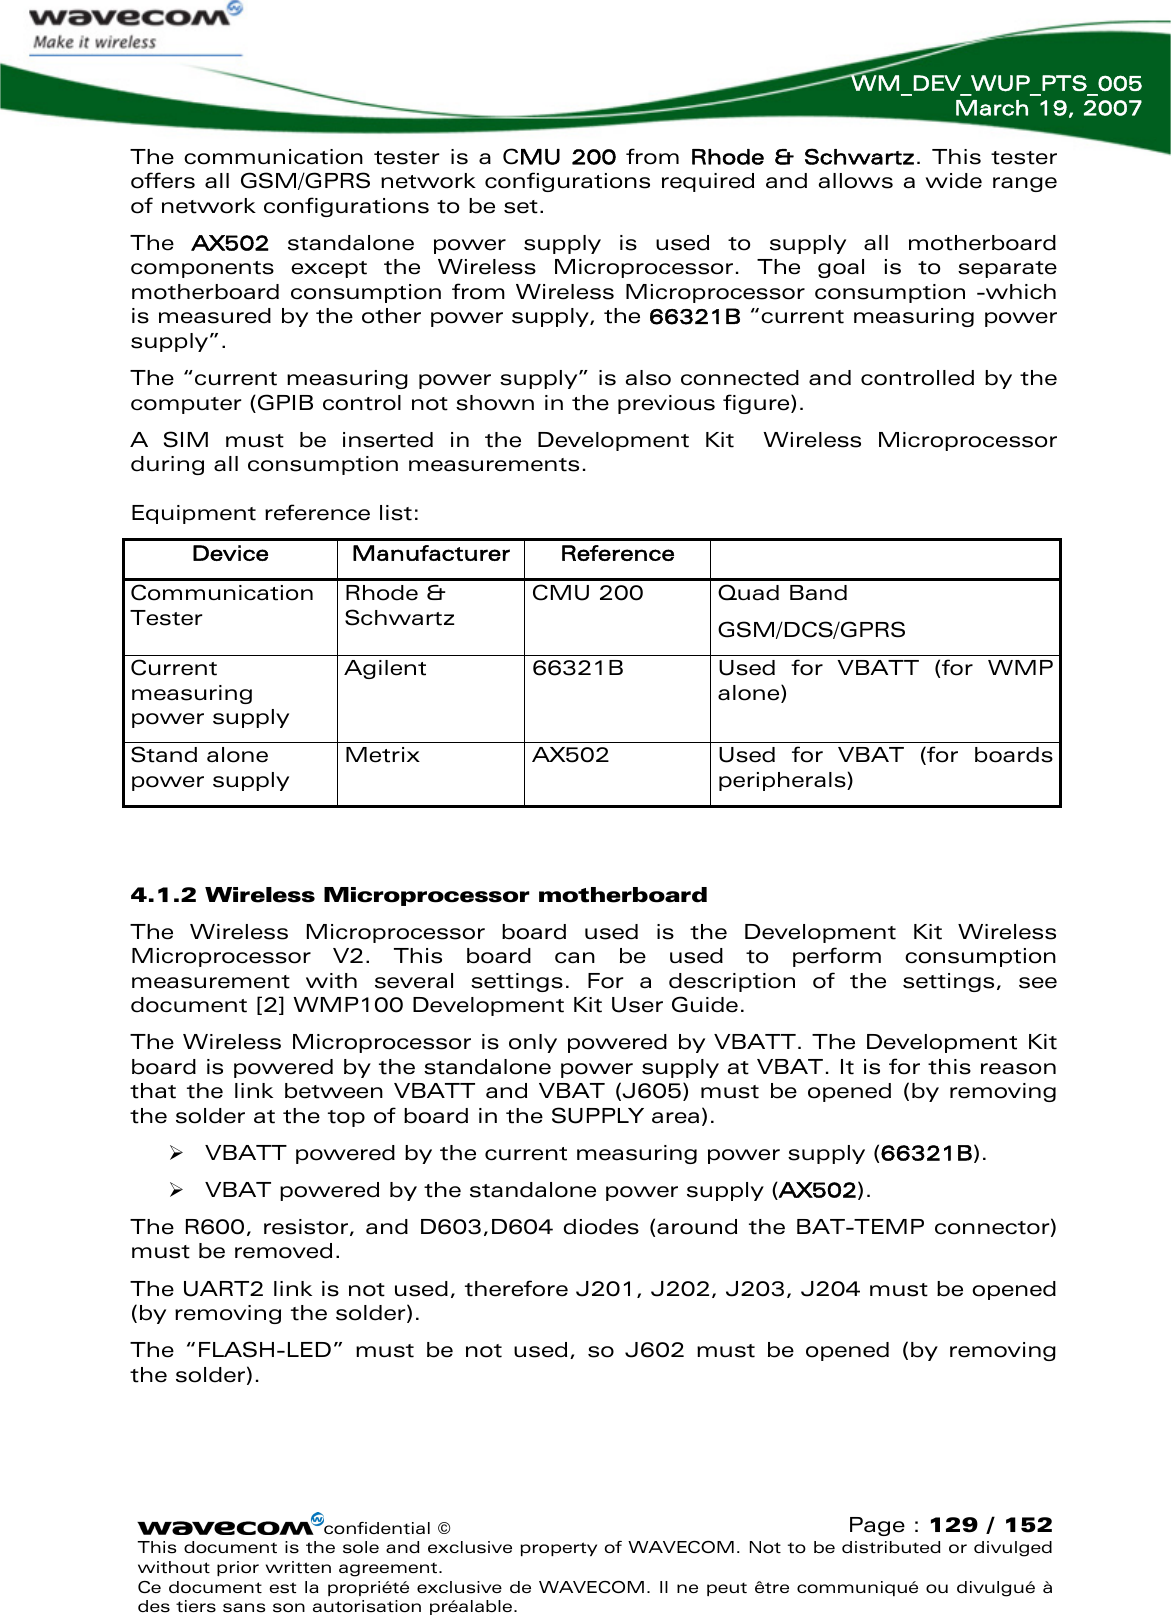   WM_DEV_WUP_PTS_005 March 19, 2007  confidential © Page : 129 / 152 This document is the sole and exclusive property of WAVECOM. Not to be distributed or divulged without prior written agreement.  Ce document est la propriété exclusive de WAVECOM. Il ne peut être communiqué ou divulgué à des tiers sans son autorisation préalable.  The communication tester is a CMU 200 from Rhode &amp; Schwartz. This tester offers all GSM/GPRS network configurations required and allows a wide range of network configurations to be set. The  AX502  standalone power supply is used to supply all motherboard components except the Wireless Microprocessor. The goal is to separate motherboard consumption from Wireless Microprocessor consumption -which is measured by the other power supply, the 66321B “current measuring power supply”. The “current measuring power supply” is also connected and controlled by the computer (GPIB control not shown in the previous figure). A SIM must be inserted in the Development Kit  Wireless Microprocessor during all consumption measurements.  Equipment reference list: Device  Manufacturer  Reference   Communication Tester Rhode &amp; Schwartz CMU 200  Quad Band GSM/DCS/GPRS Current measuring power supply Agilent  66321B  Used for VBATT (for WMP alone) Stand alone power supply Metrix  AX502  Used for VBAT (for boards peripherals)  4.1.2 Wireless Microprocessor motherboard The Wireless Microprocessor board used is the Development Kit Wireless Microprocessor V2. This board can be used to perform consumption measurement with several settings. For a description of the settings, see document [2] WMP100 Development Kit User Guide. The Wireless Microprocessor is only powered by VBATT. The Development Kit board is powered by the standalone power supply at VBAT. It is for this reason that the link between VBATT and VBAT (J605) must be opened (by removing the solder at the top of board in the SUPPLY area). ¾ VBATT powered by the current measuring power supply (66321B). ¾ VBAT powered by the standalone power supply (AX502). The R600, resistor, and D603,D604 diodes (around the BAT-TEMP connector) must be removed. The UART2 link is not used, therefore J201, J202, J203, J204 must be opened (by removing the solder).  The “FLASH-LED” must be not used, so J602 must be opened (by removing the solder).  